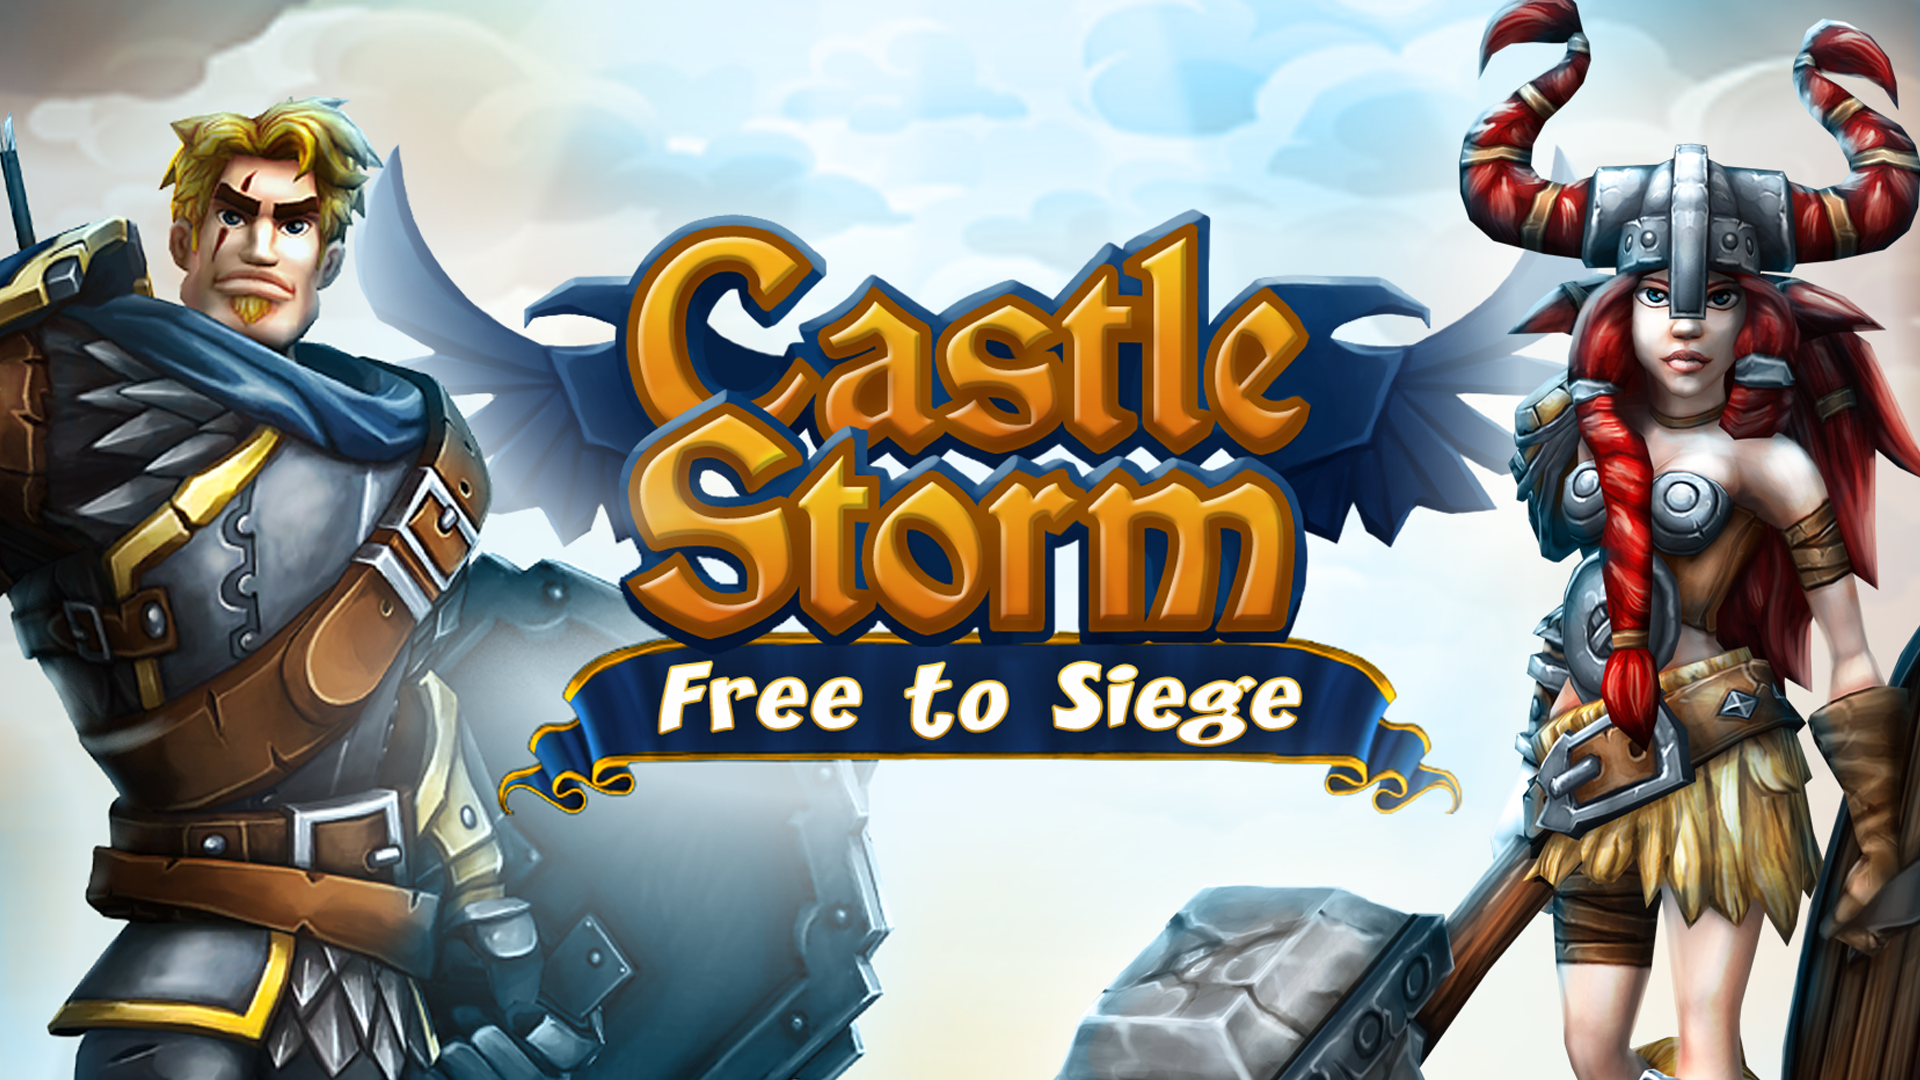 Android application CastleStorm - Free to Siege screenshort